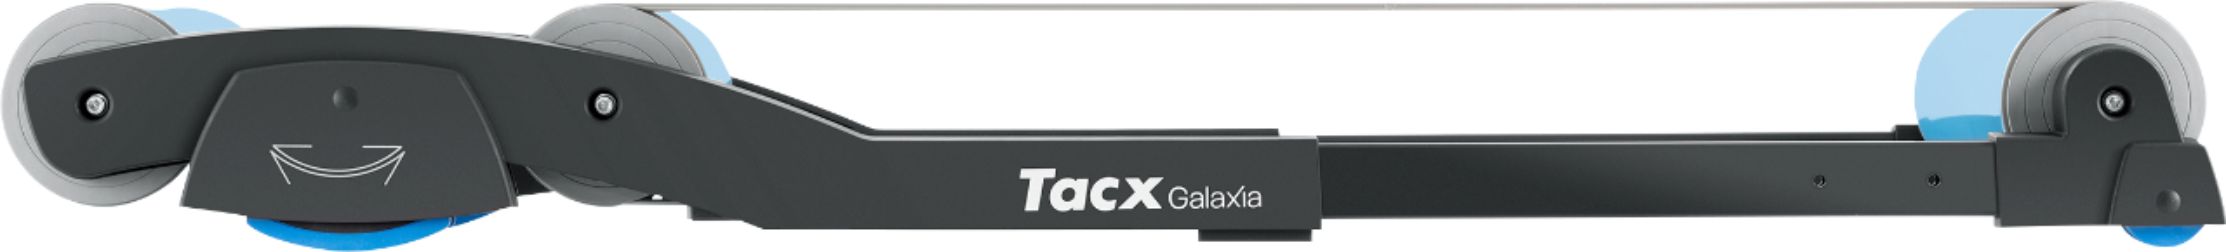 tacx galaxia roller trainer t1100